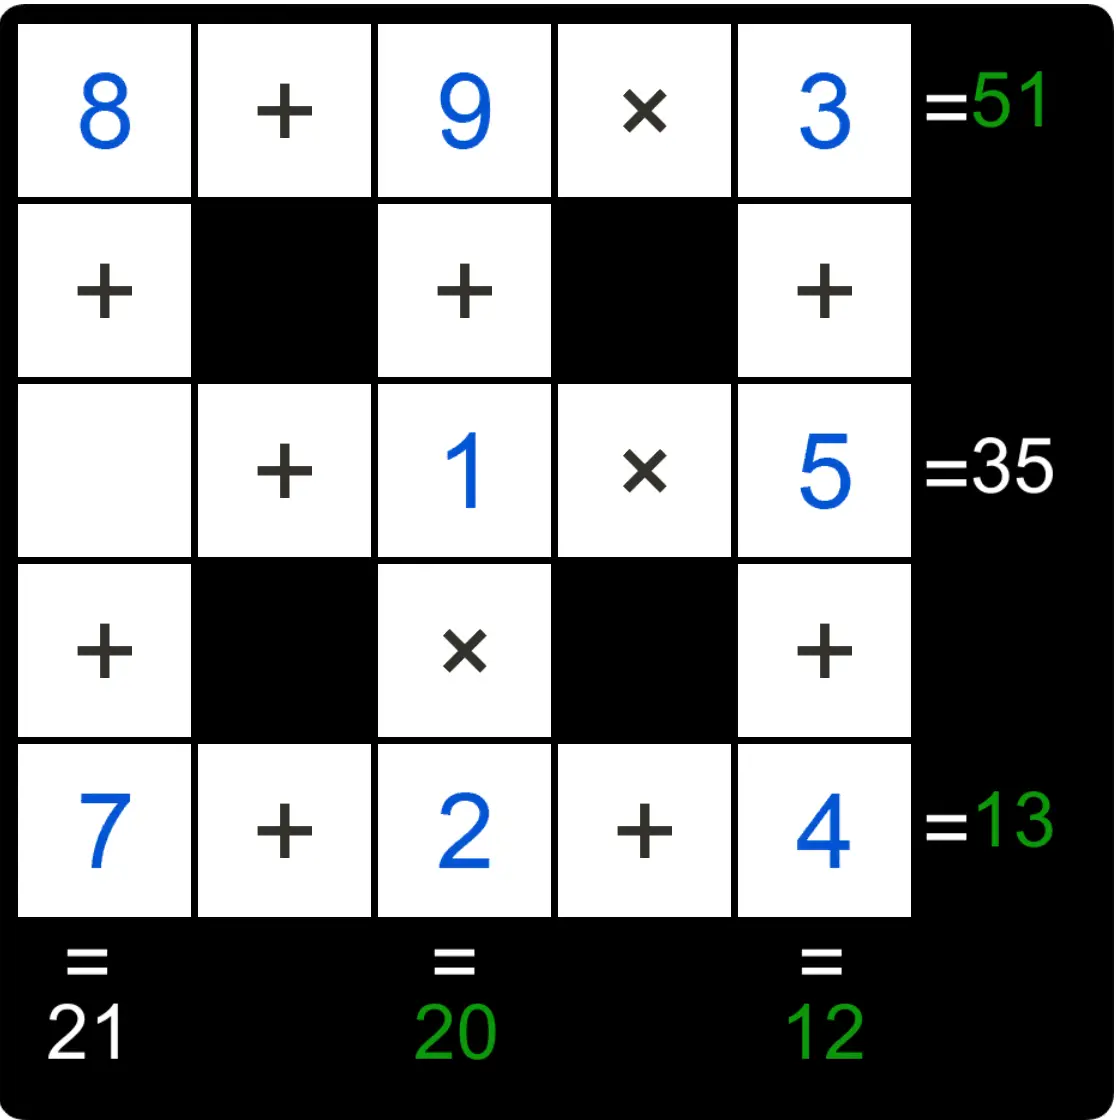 Puzzle Page Cross Sum July 14 2019 Answers - PuzzlePageAnswers.com